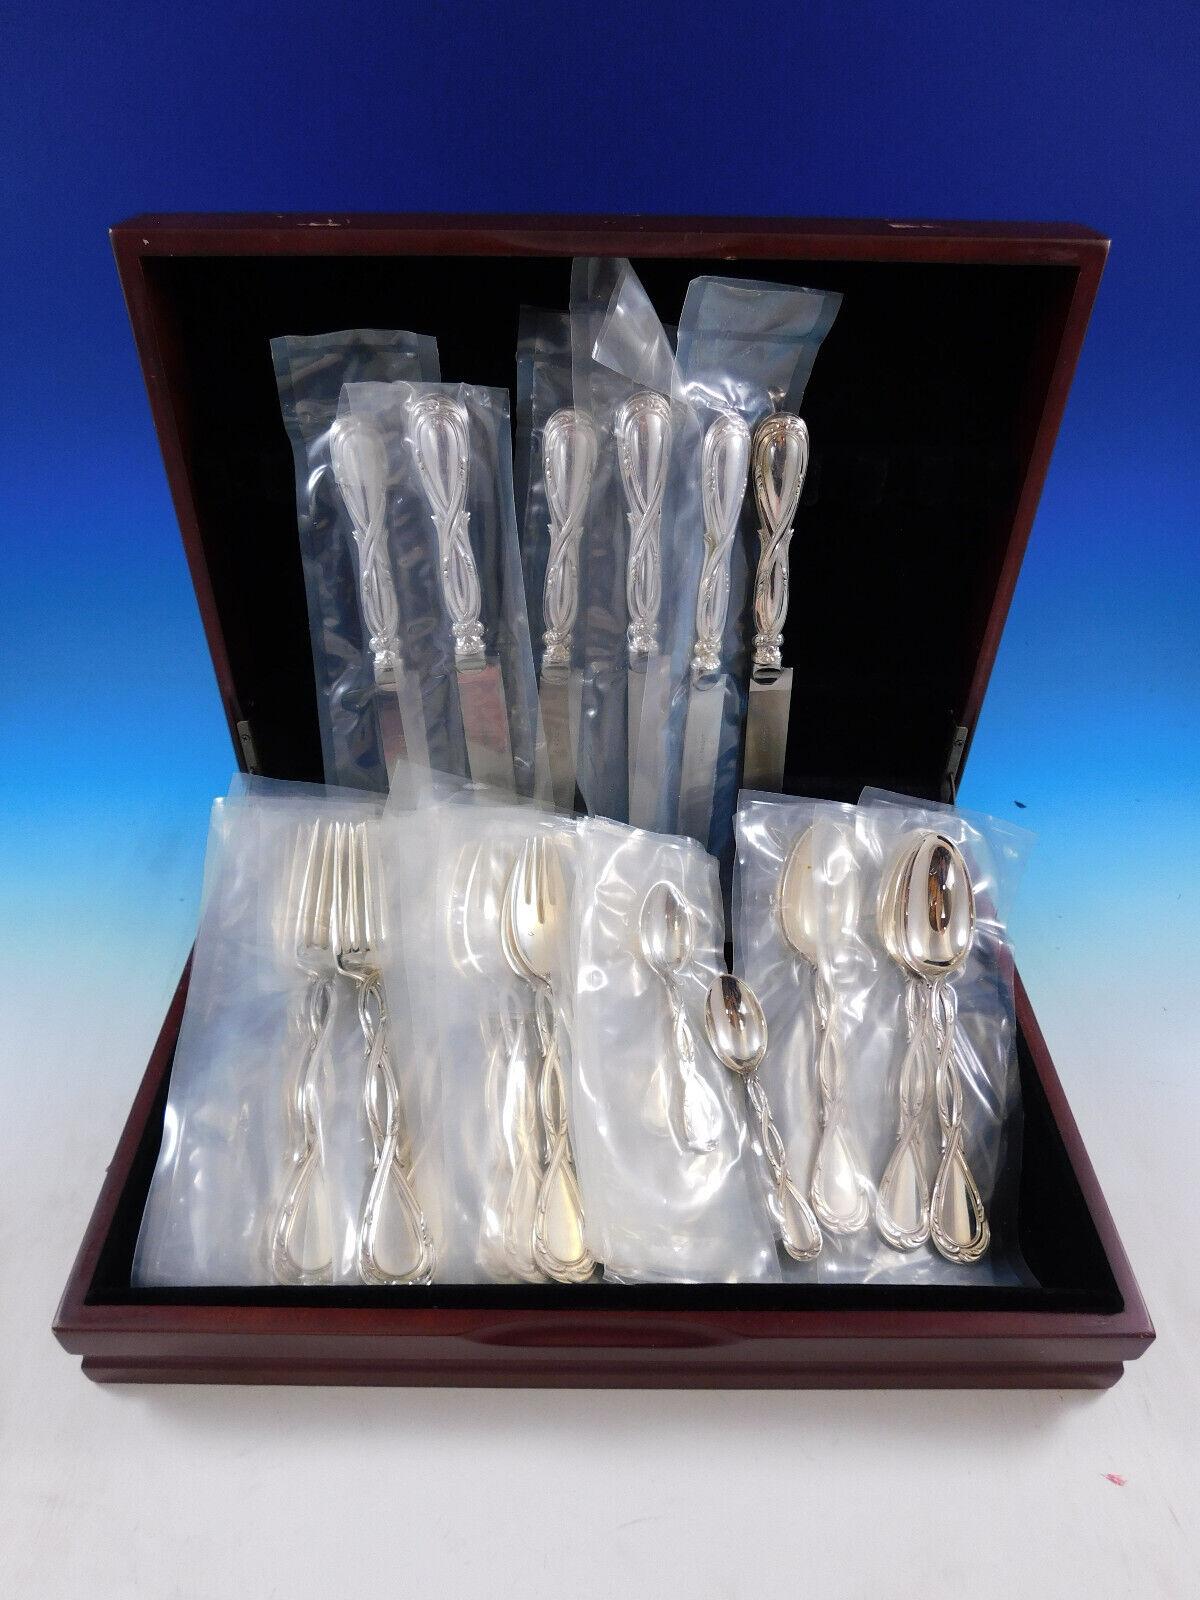 These handcrafted utensils show off the exceptional skill of the legendary Puiforcat silversmiths. The high-quality of Puiforcat cutlery is also revealed in the high percentage of 950/1000 sterling silver. Handmade, exceptional quality.

Designed in